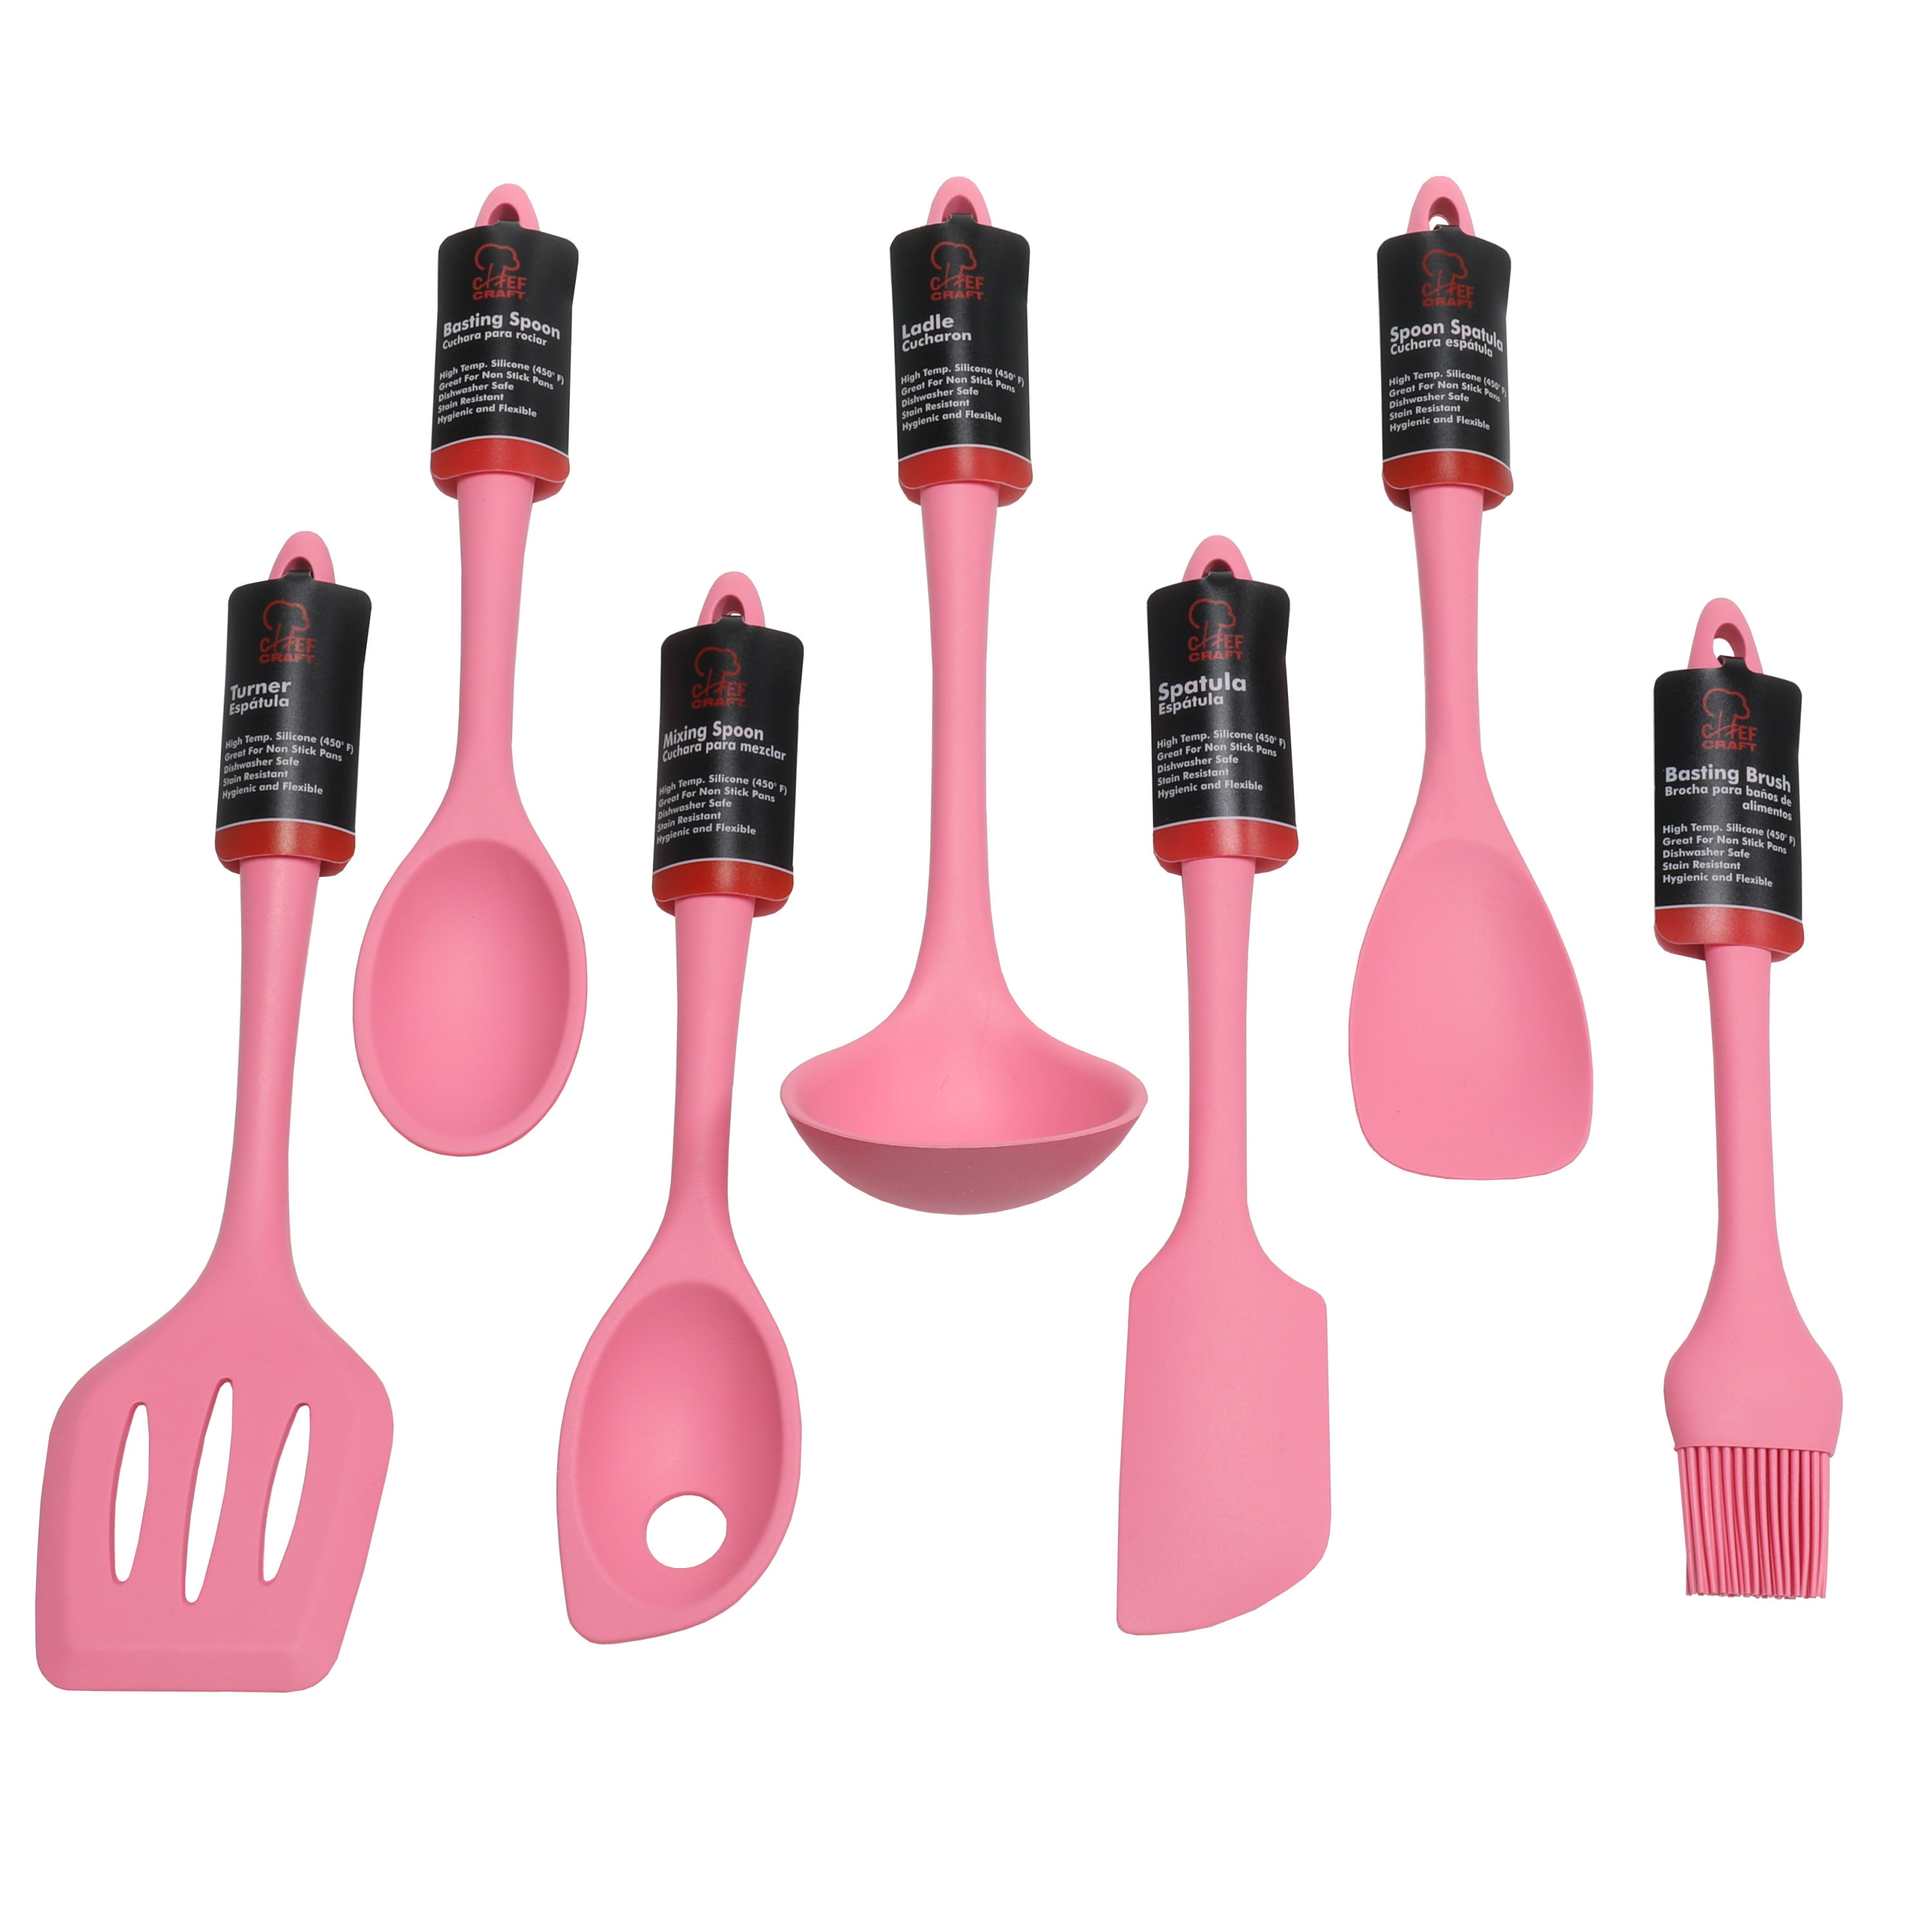  Silicone Cooking Utensils Set - 446°F Heat Resistant Kitchen  Utensils,Turner Tongs,Spatula,Spoon,Brush,Whisk,Kitchen Utensil Gadgets Tools  Set for Nonstick Cookware,Dishwasher Safe Pink (BPA Free) : Home & Kitchen